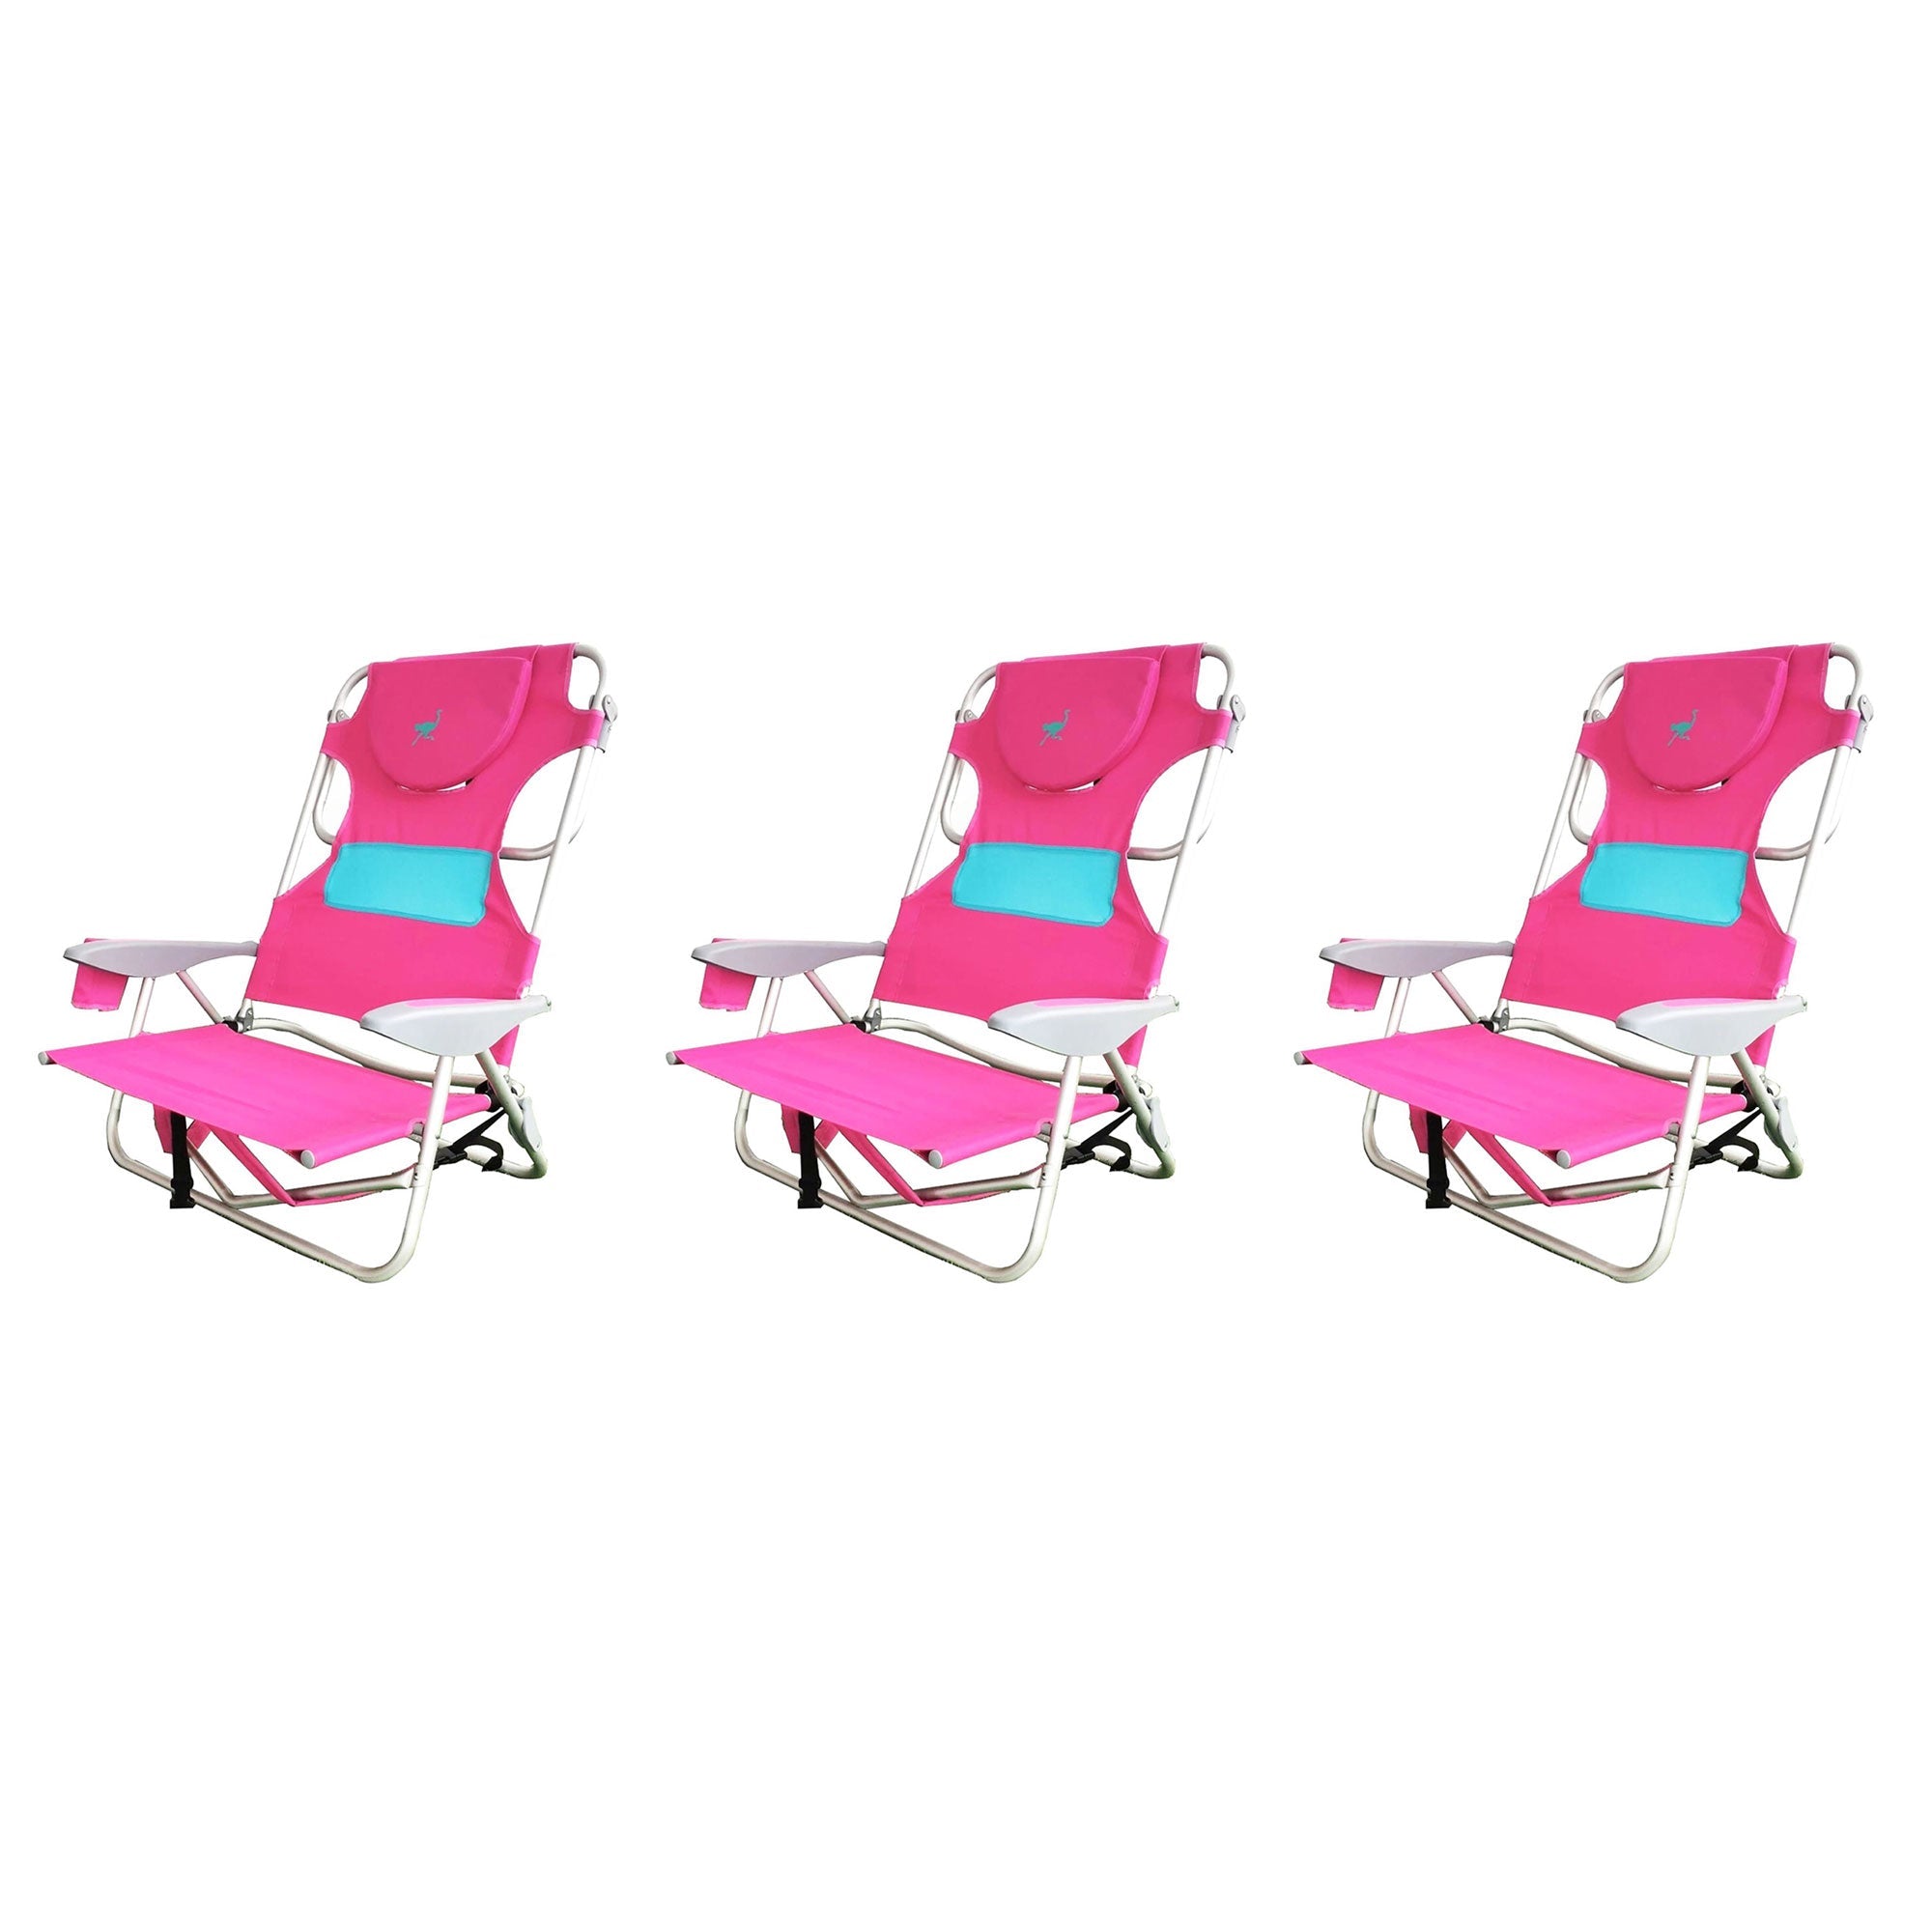 Ostrich-Outdoor-Beach-Ladies-Comfort-on-Your-Back-Beach-Chair,-Pink-(3-Pack)-Chairs-&-Seating